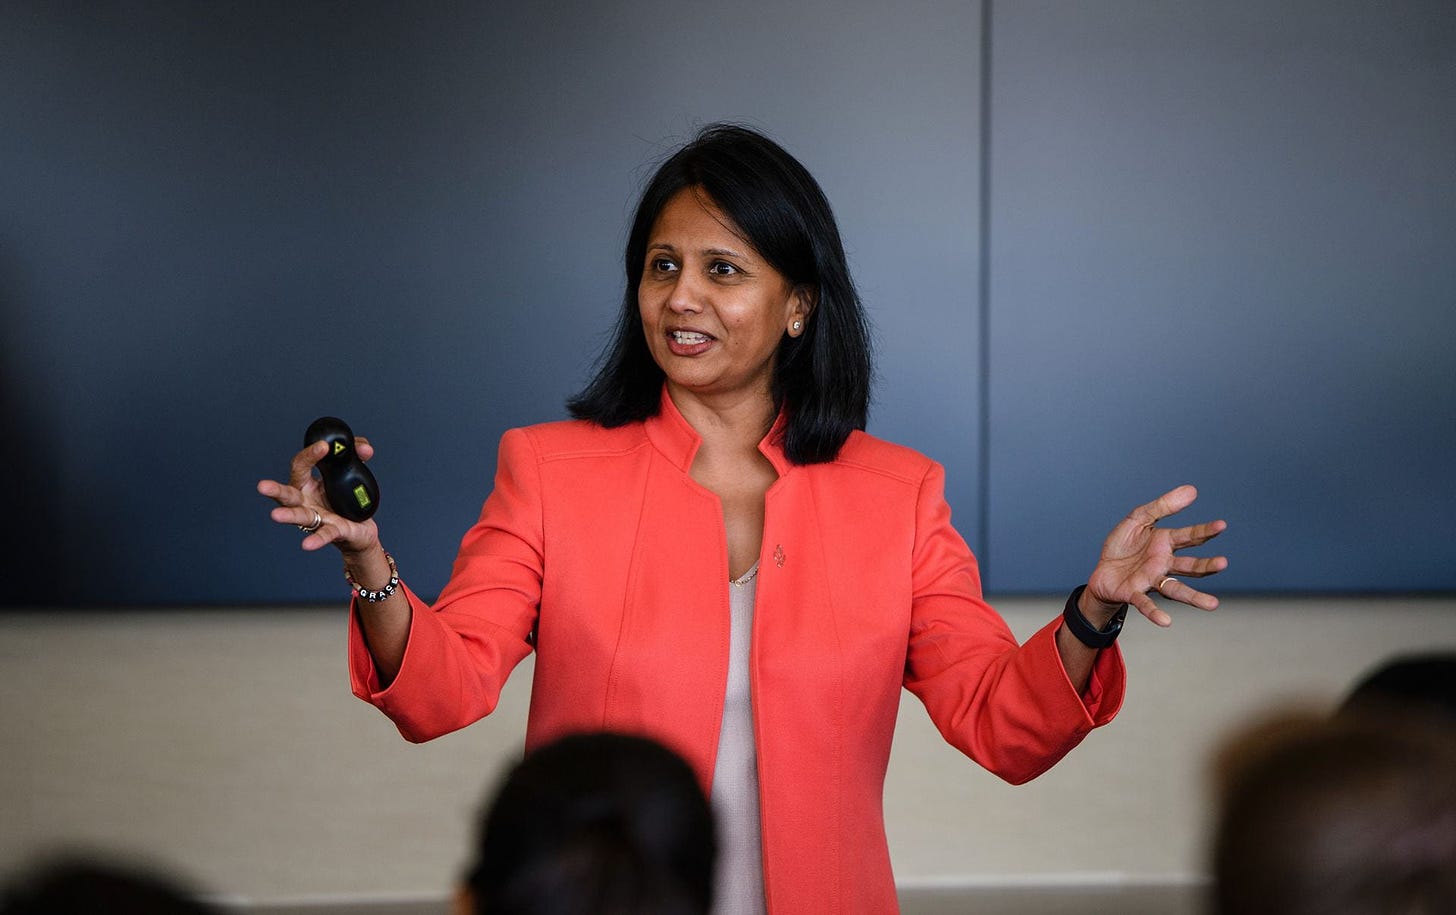 Lilly SVP and CIO Aarti Shah visits Kelley, offers practical career advice  to students – Kelley School of Business